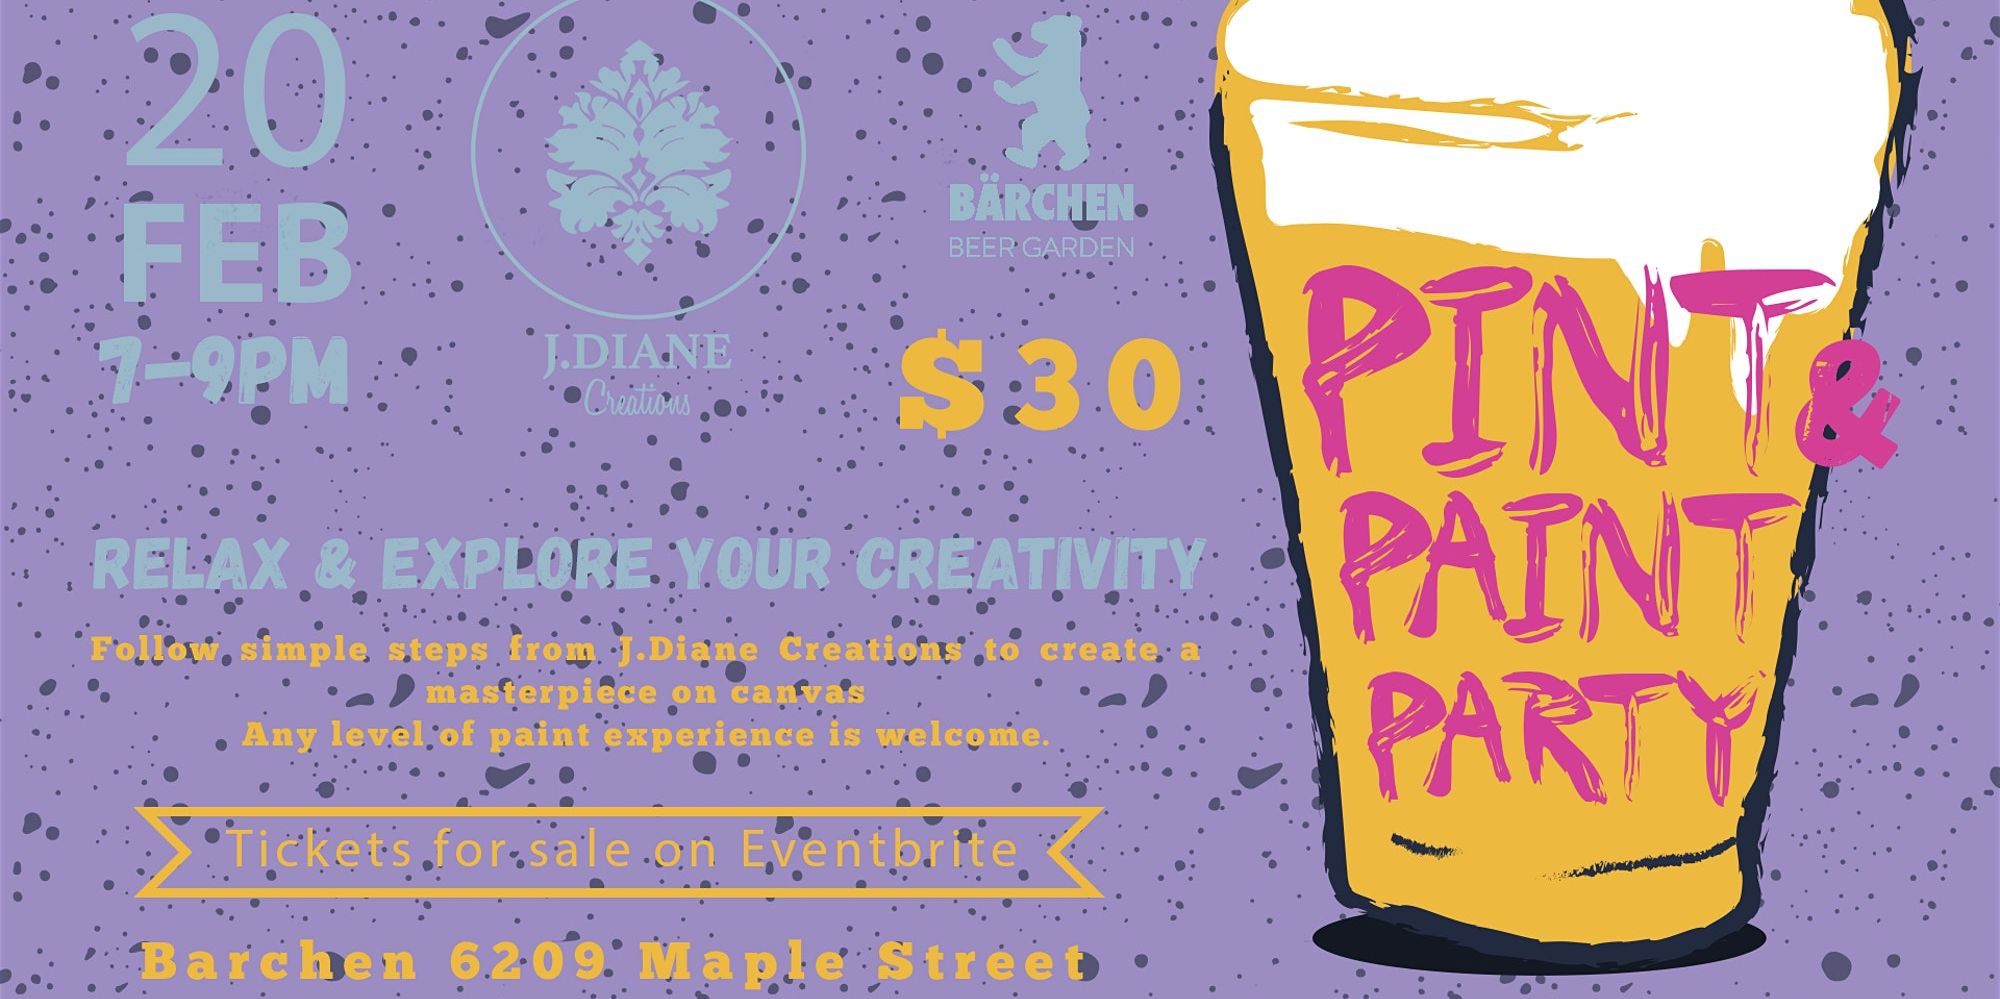 Pint & Paint Night at Barchen promotional image